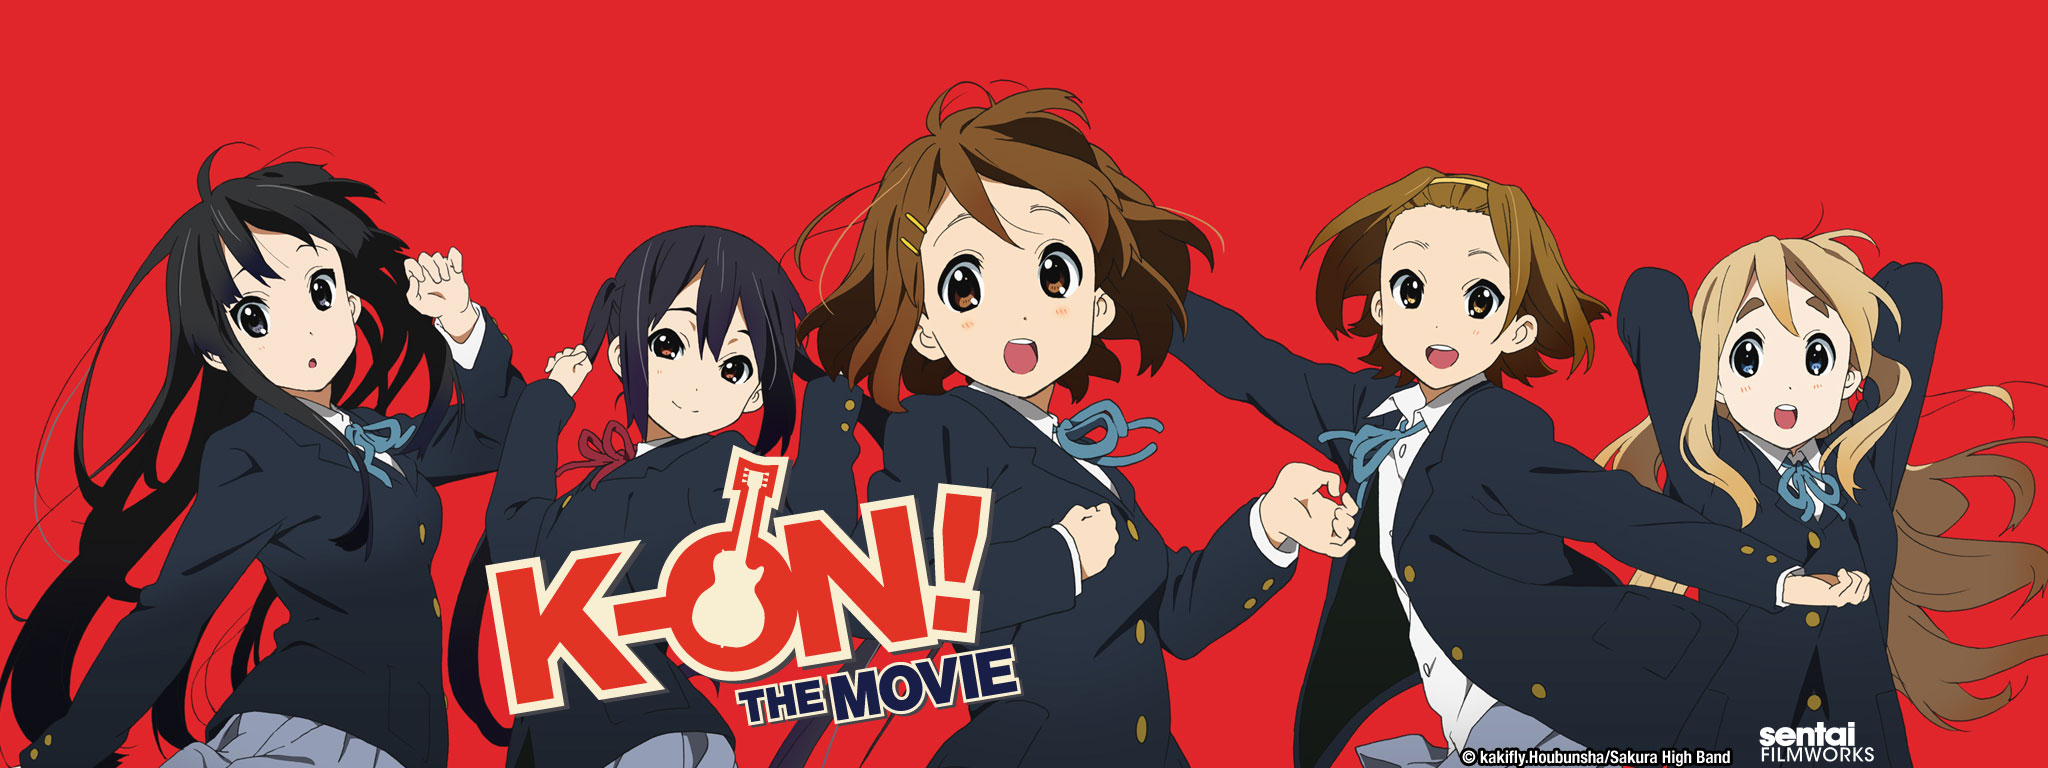 Title Art for K-ON!: The Movie